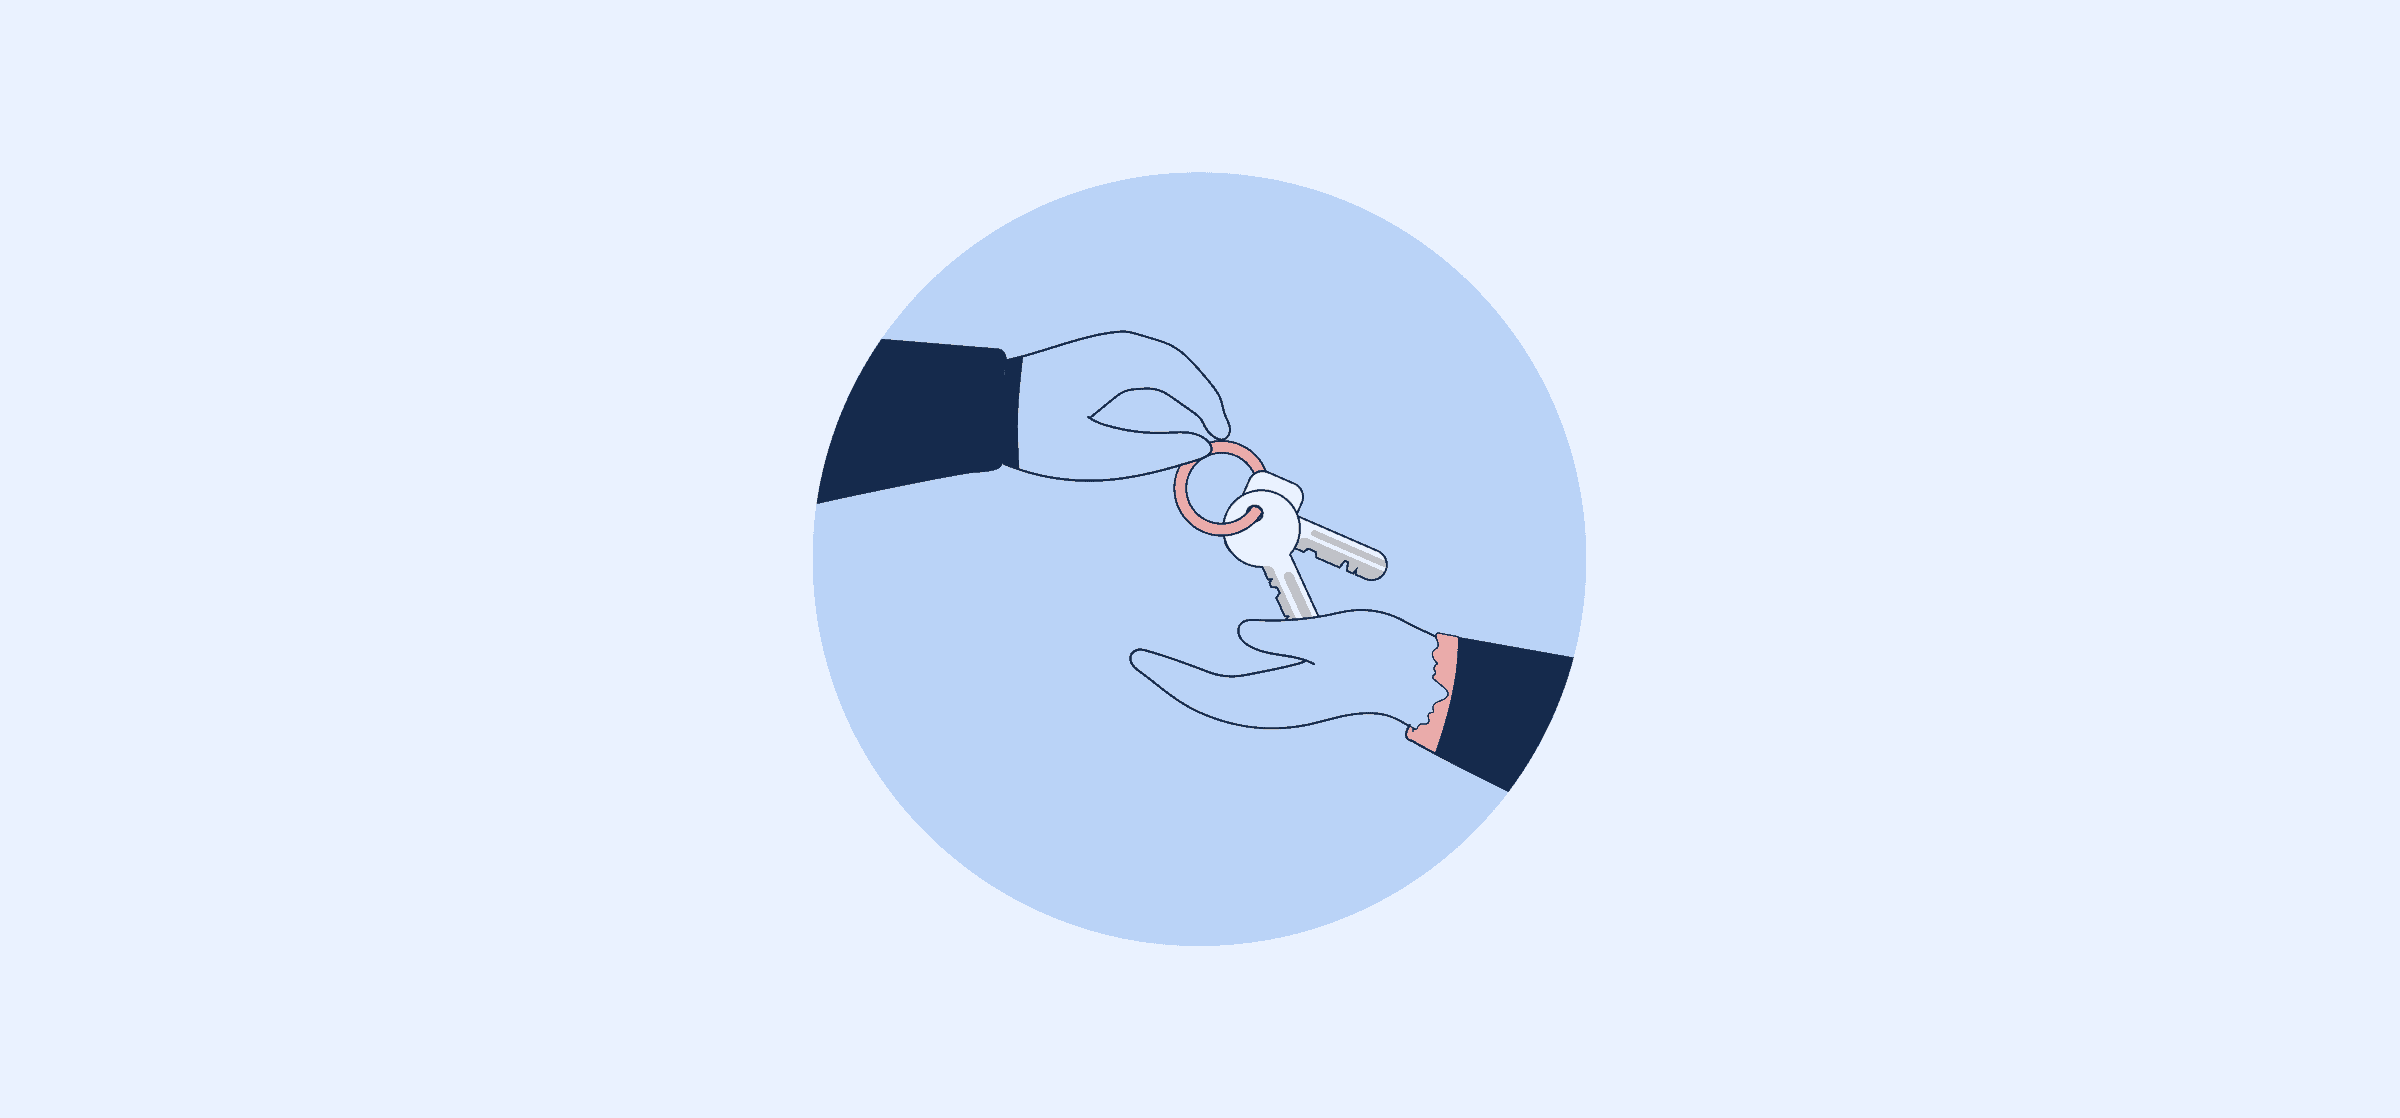 An illustration of hands passing keys, representing the project closeout.